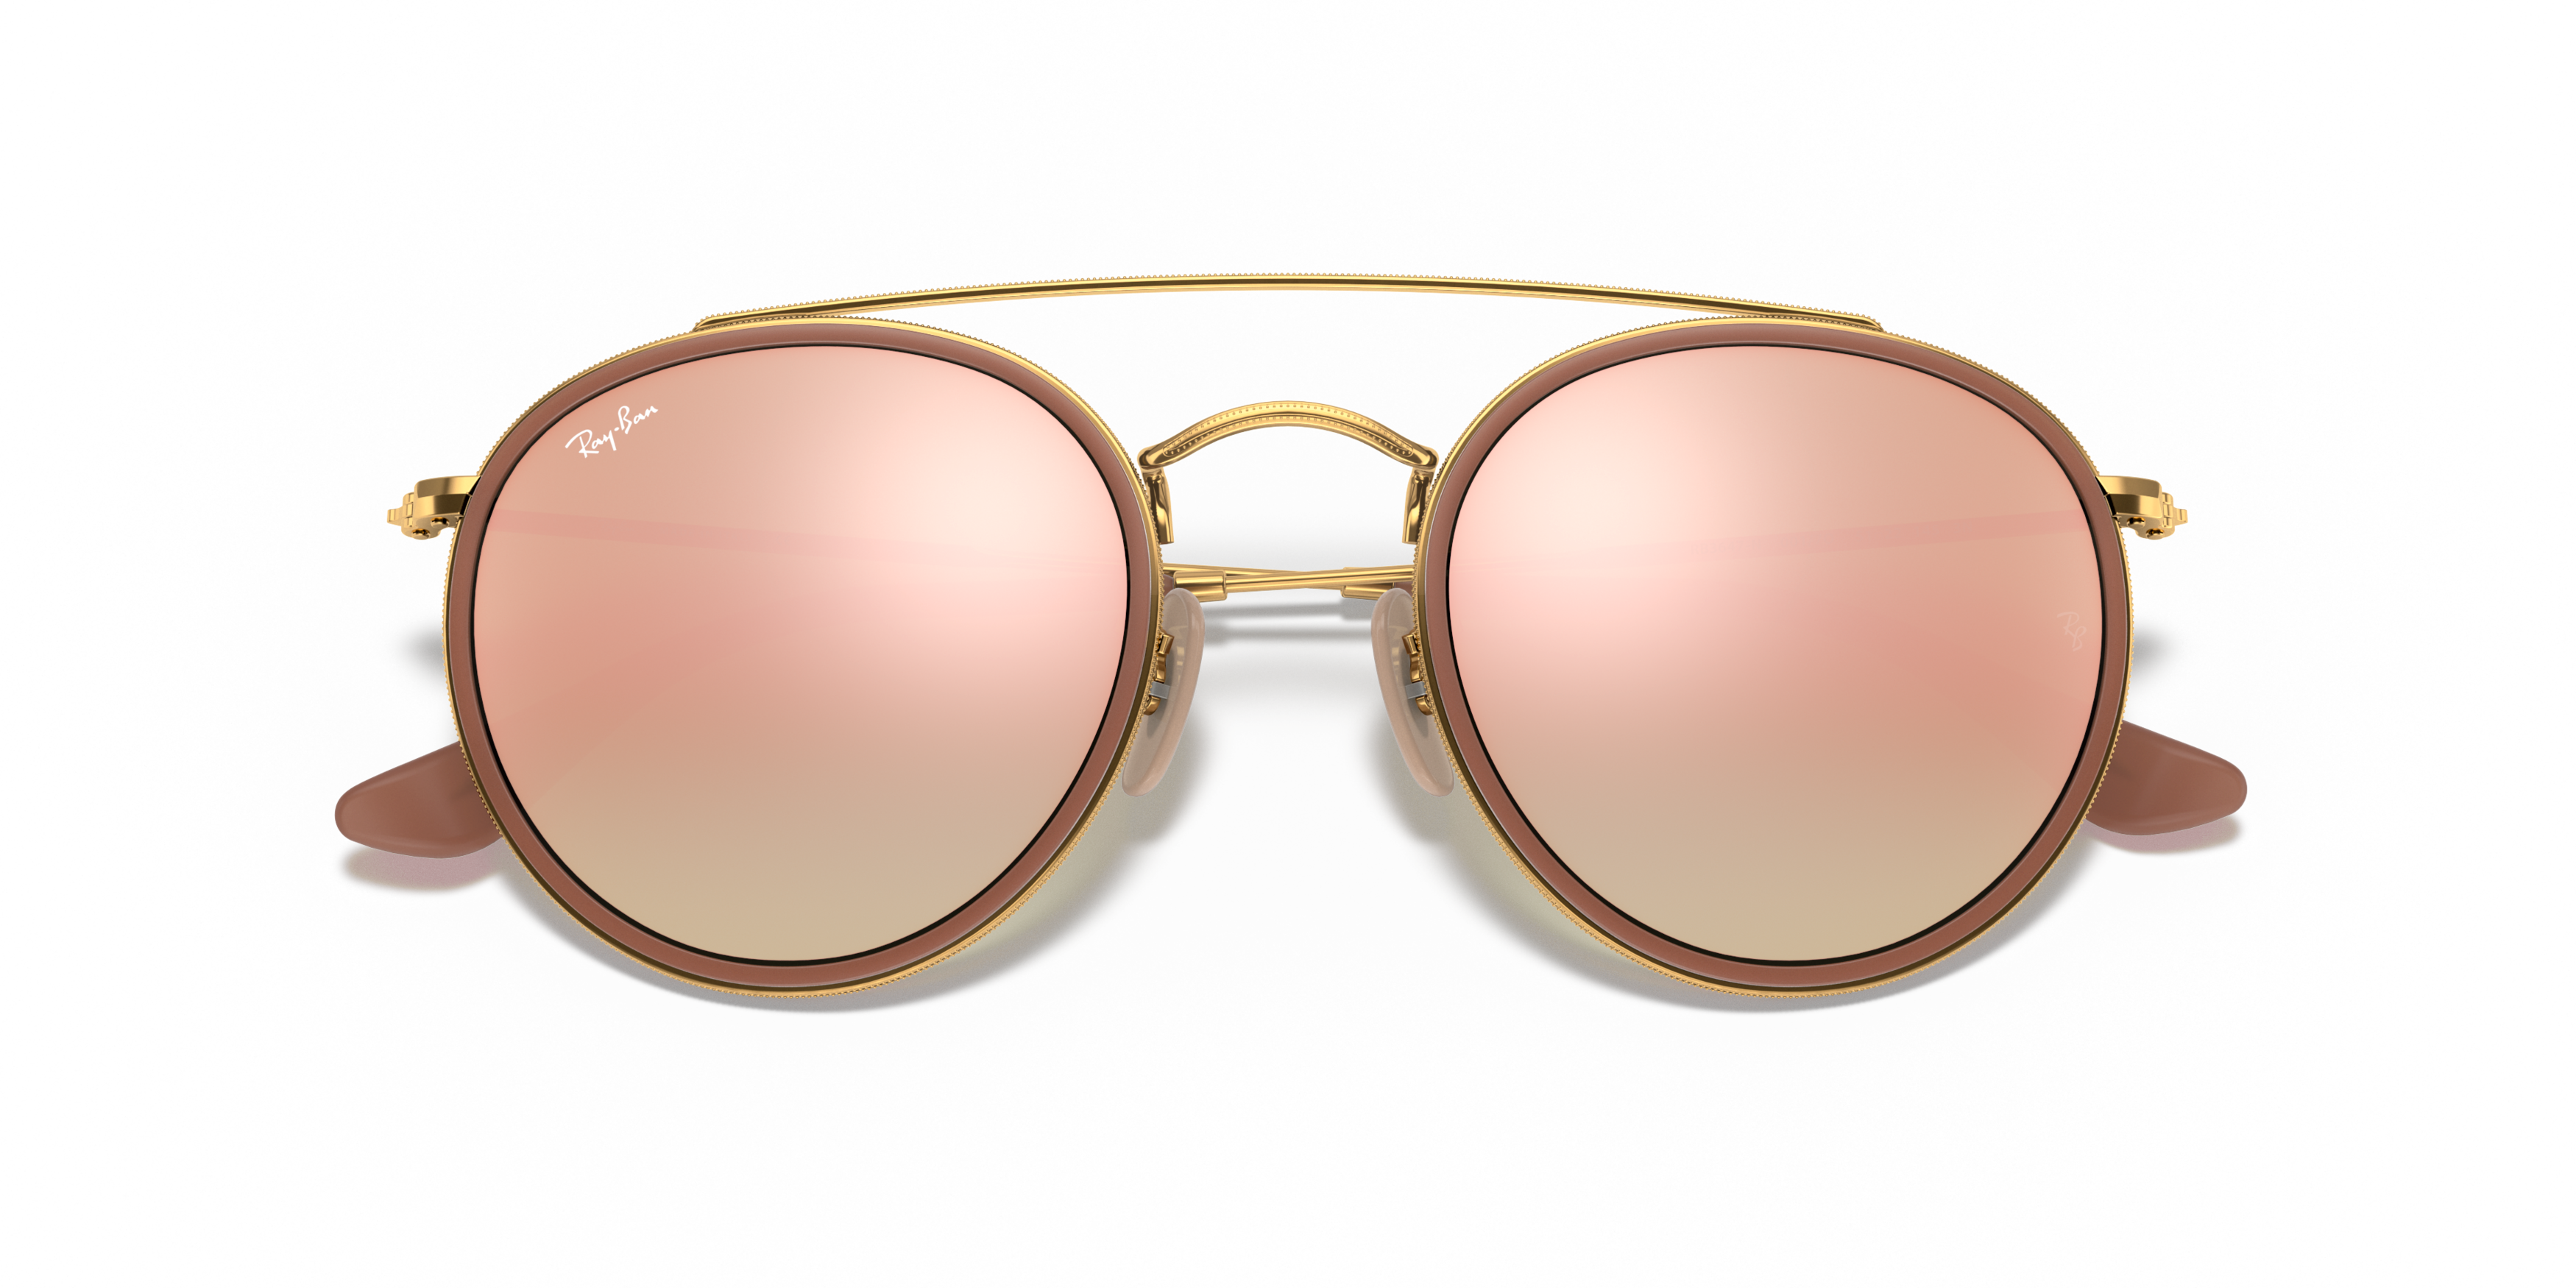 Folded Ray-Ban RB 3647N (001/7O) Sunglasses Pink / Gold